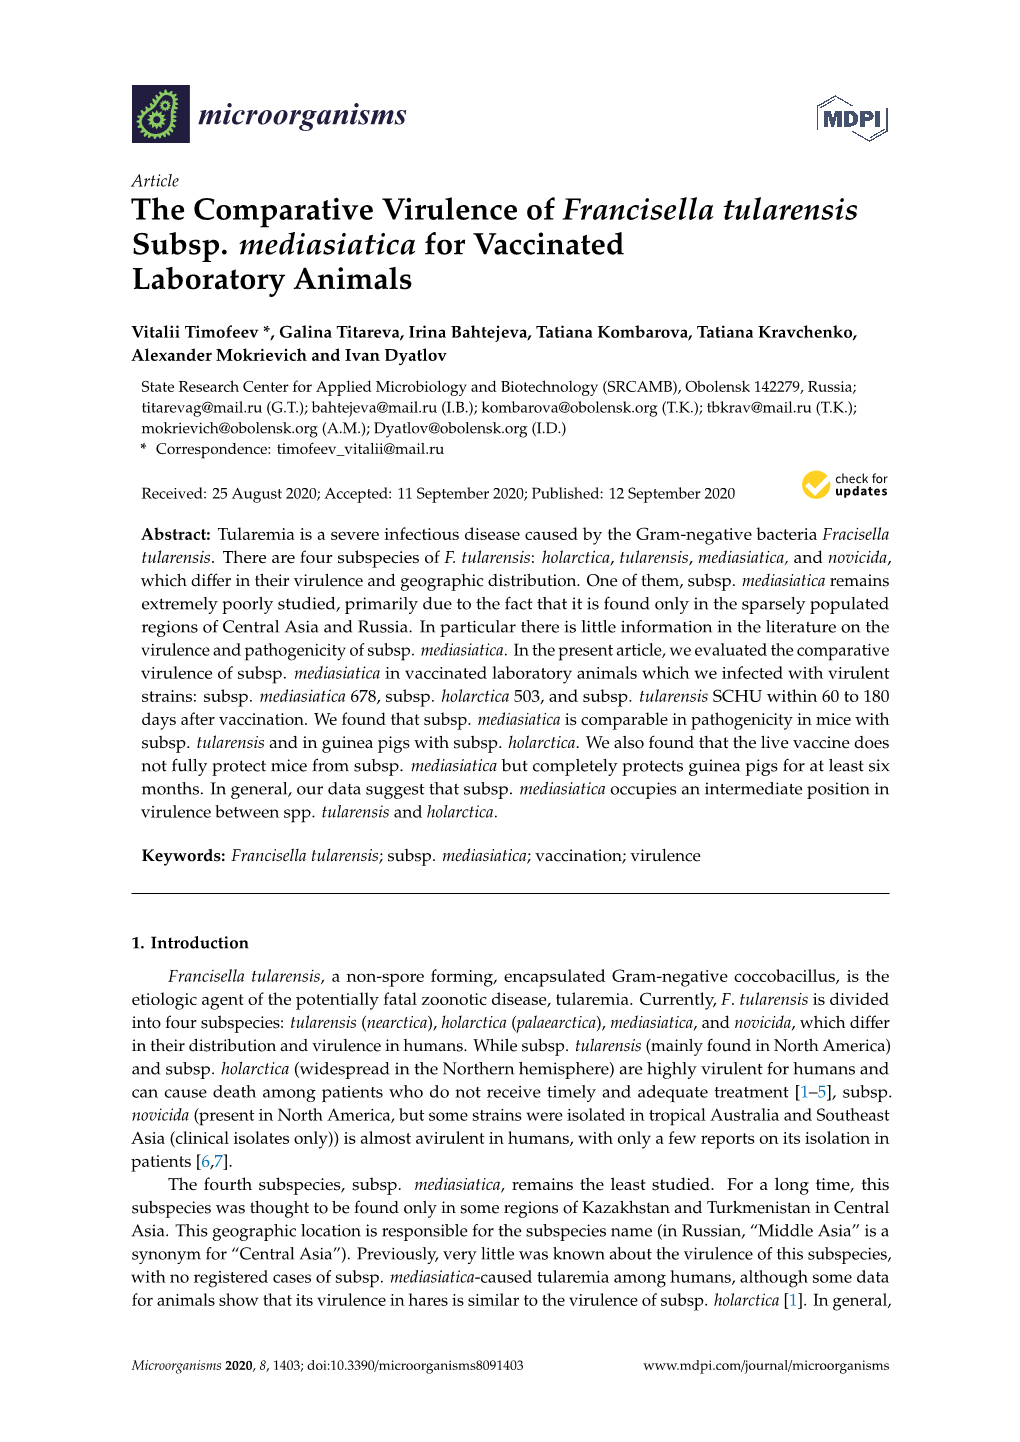 The Comparative Virulence of Francisella Tularensis Subsp